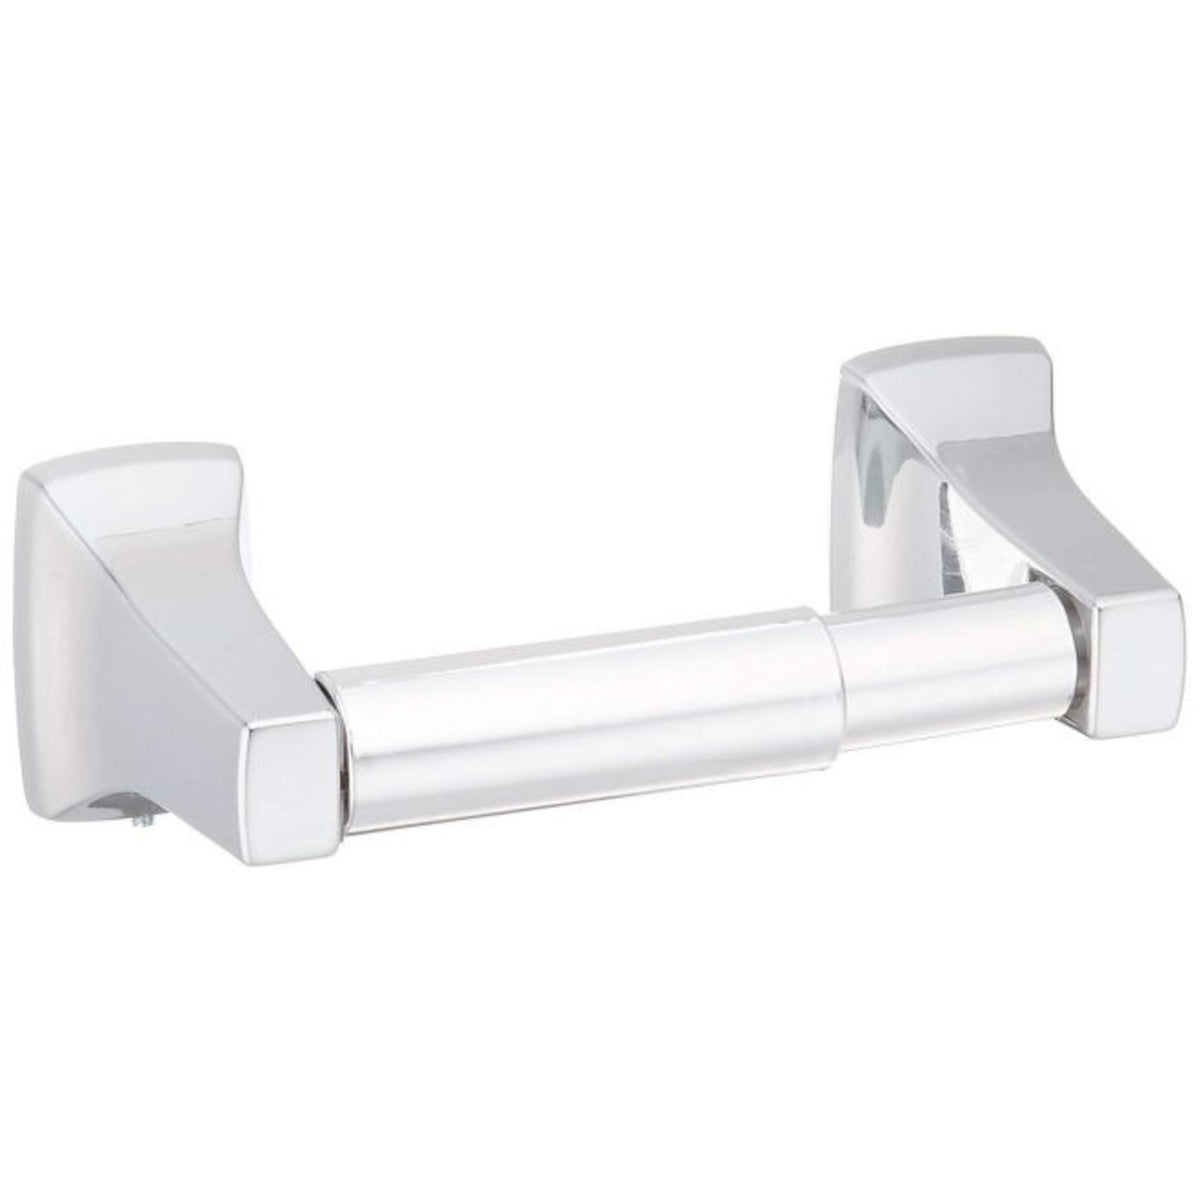 Moen P5080 Contemporary Spring Loaded Paper Holder With White Roller, Bright Chrome